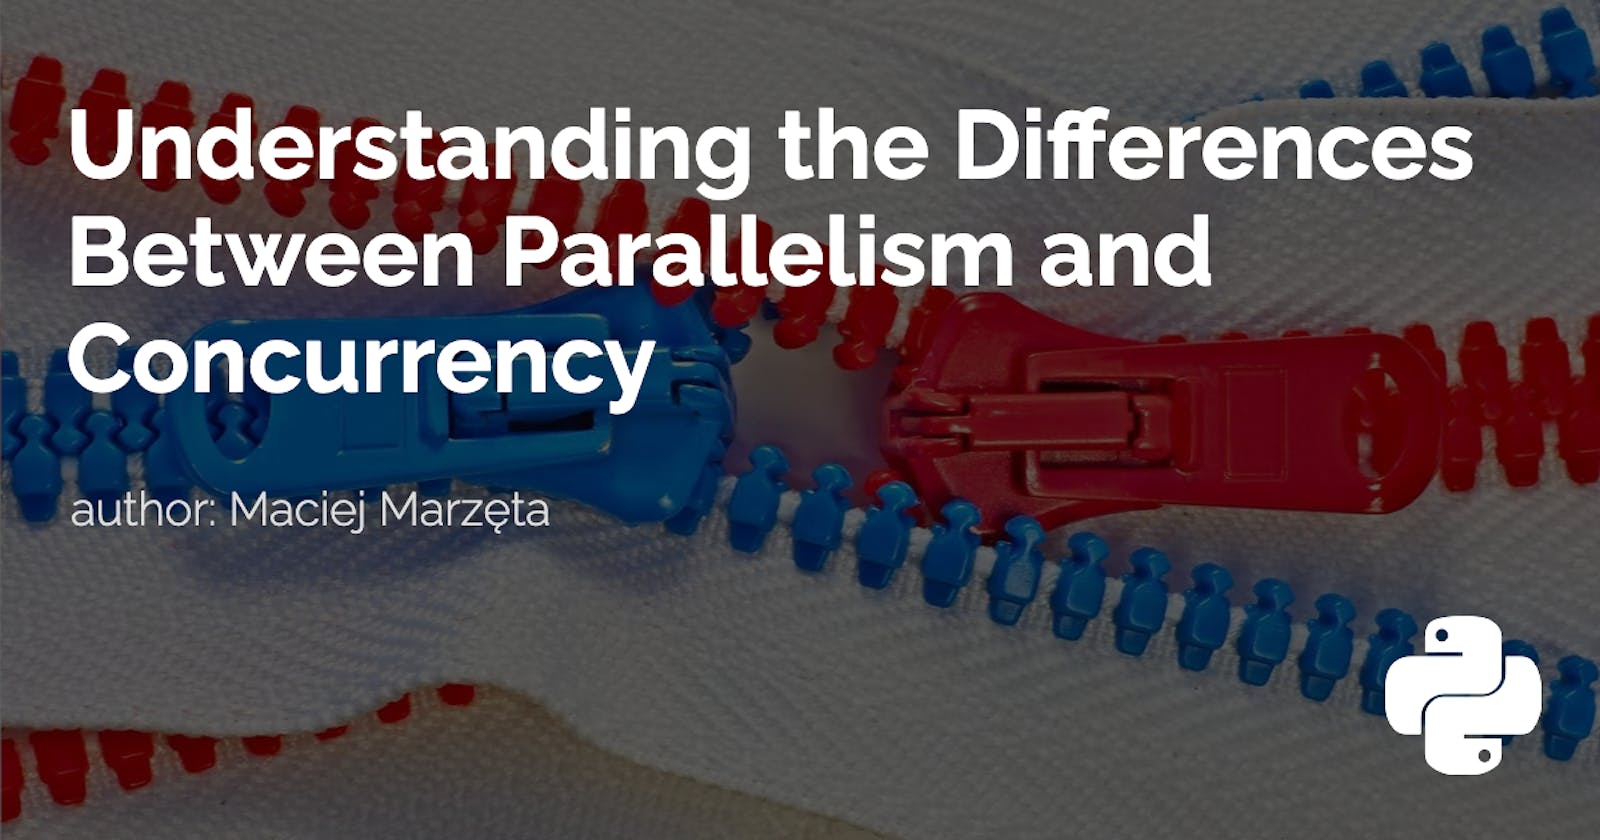 Understanding the Differences Between Parallelism and Concurrency